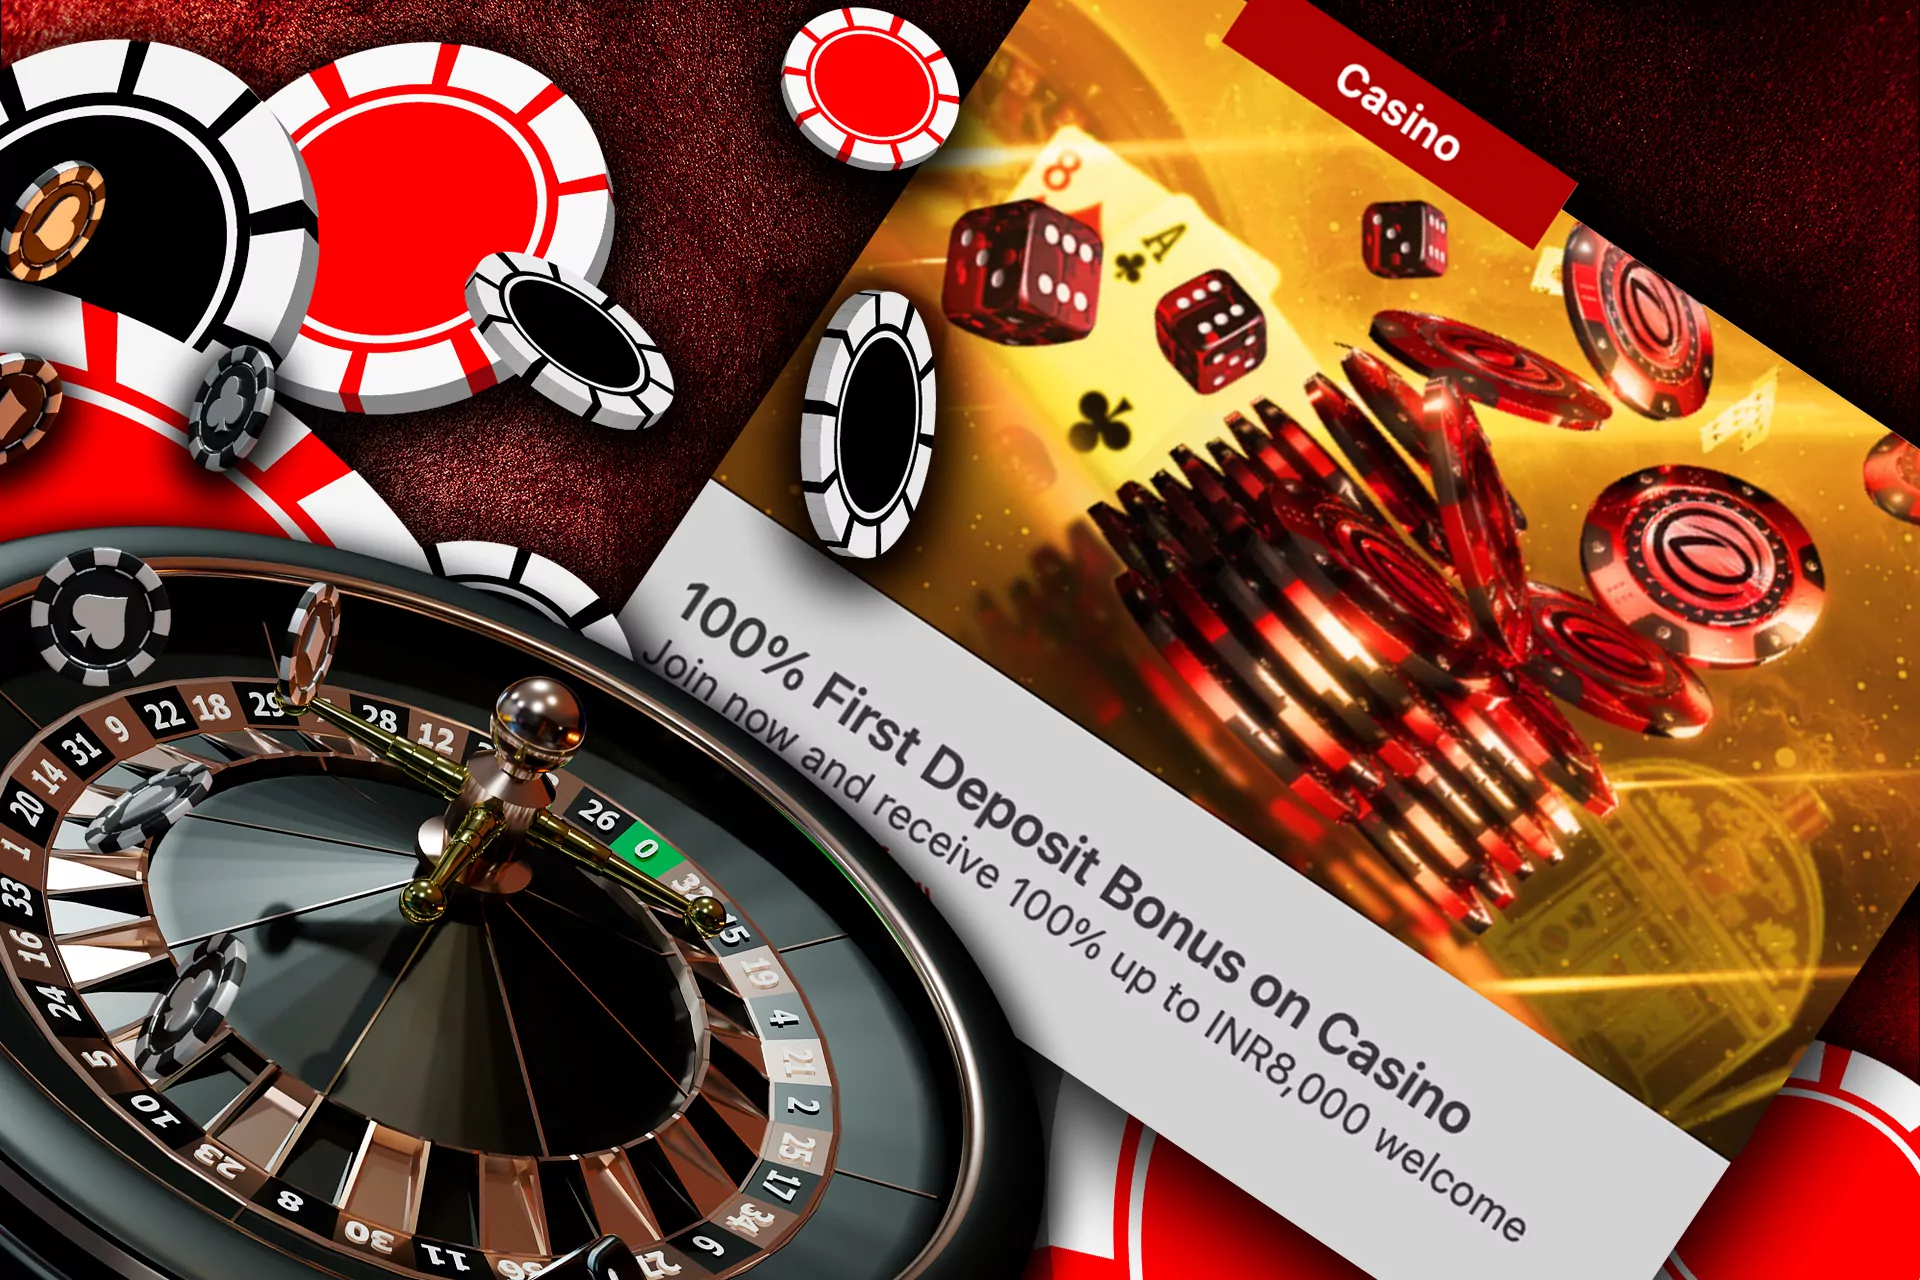 If you are also like playing casino games, you can get a special bonus for it from Dafabet as well.